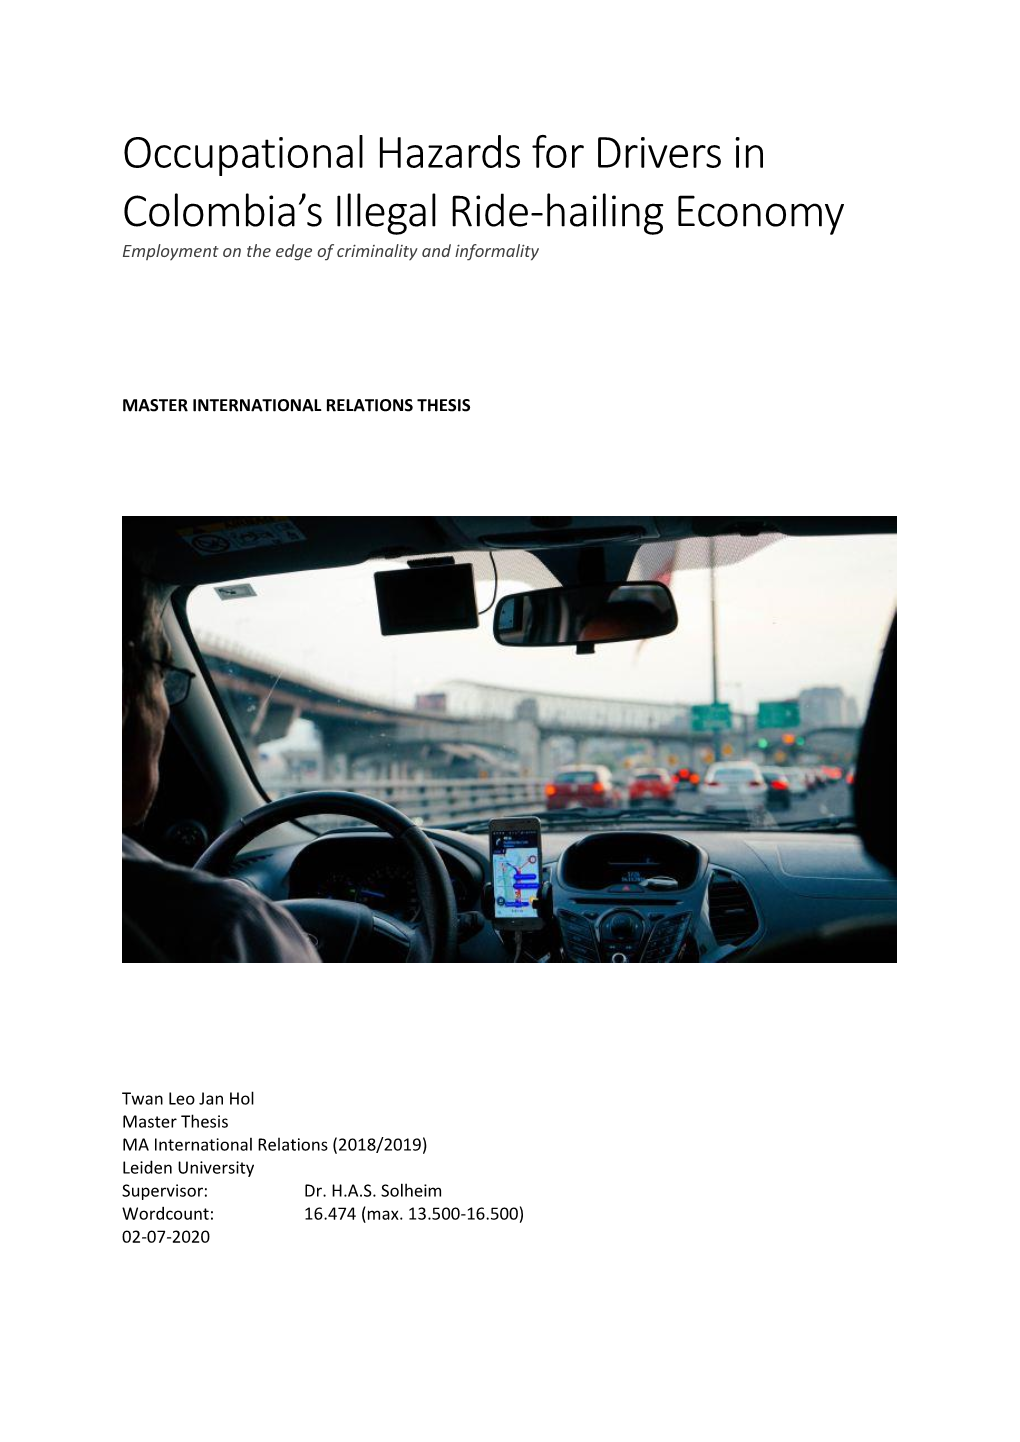 Occupational Hazards for Drivers in Colombia's Illegal Ride-Hailing Economy